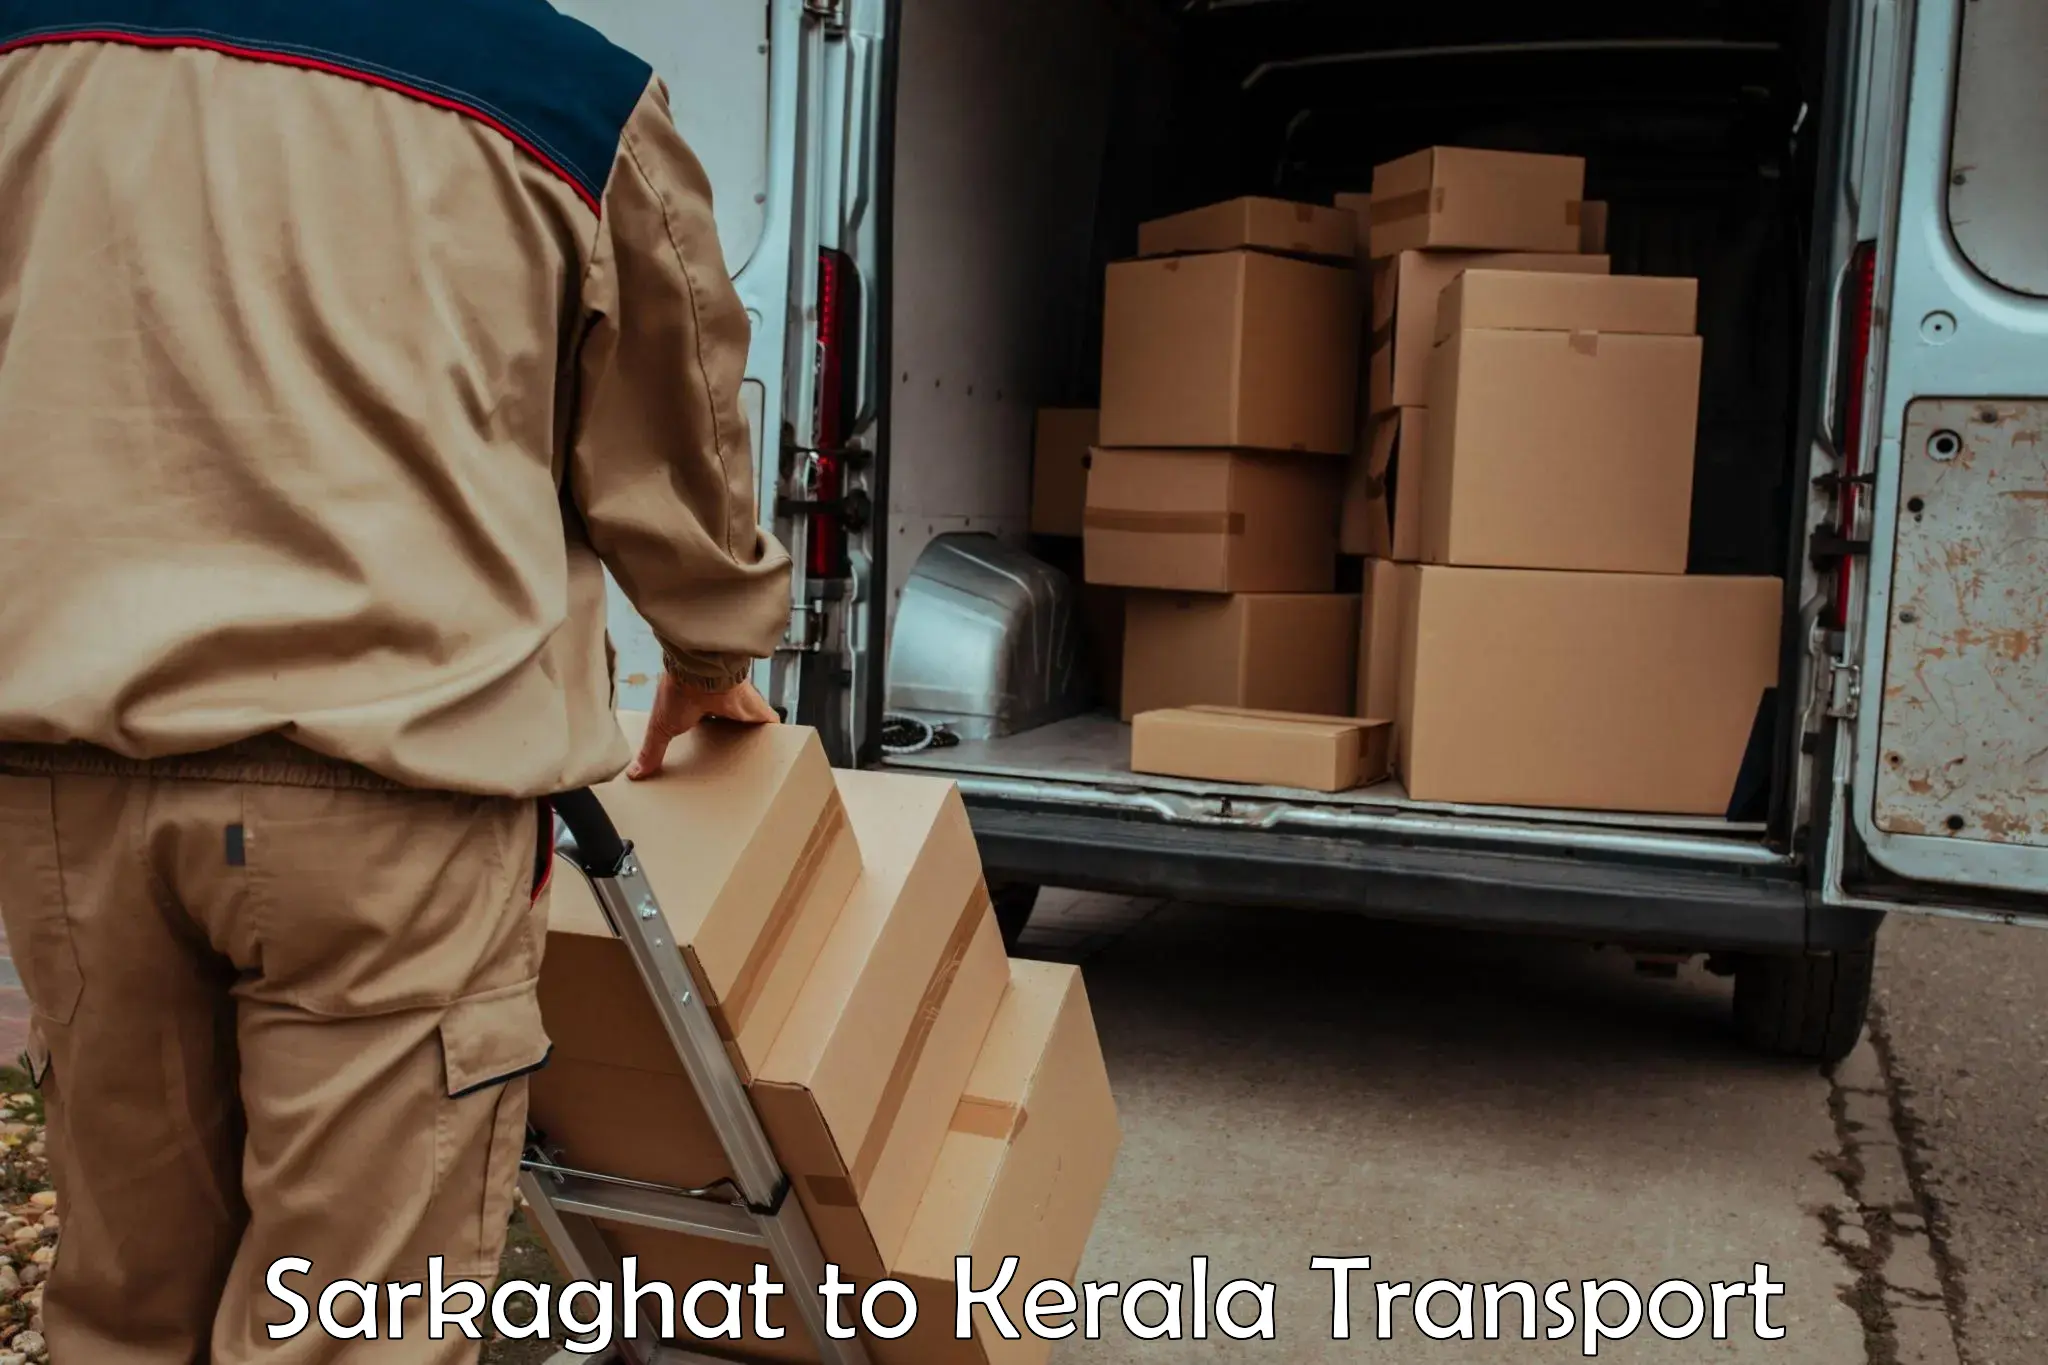 Cycle transportation service Sarkaghat to Tirur